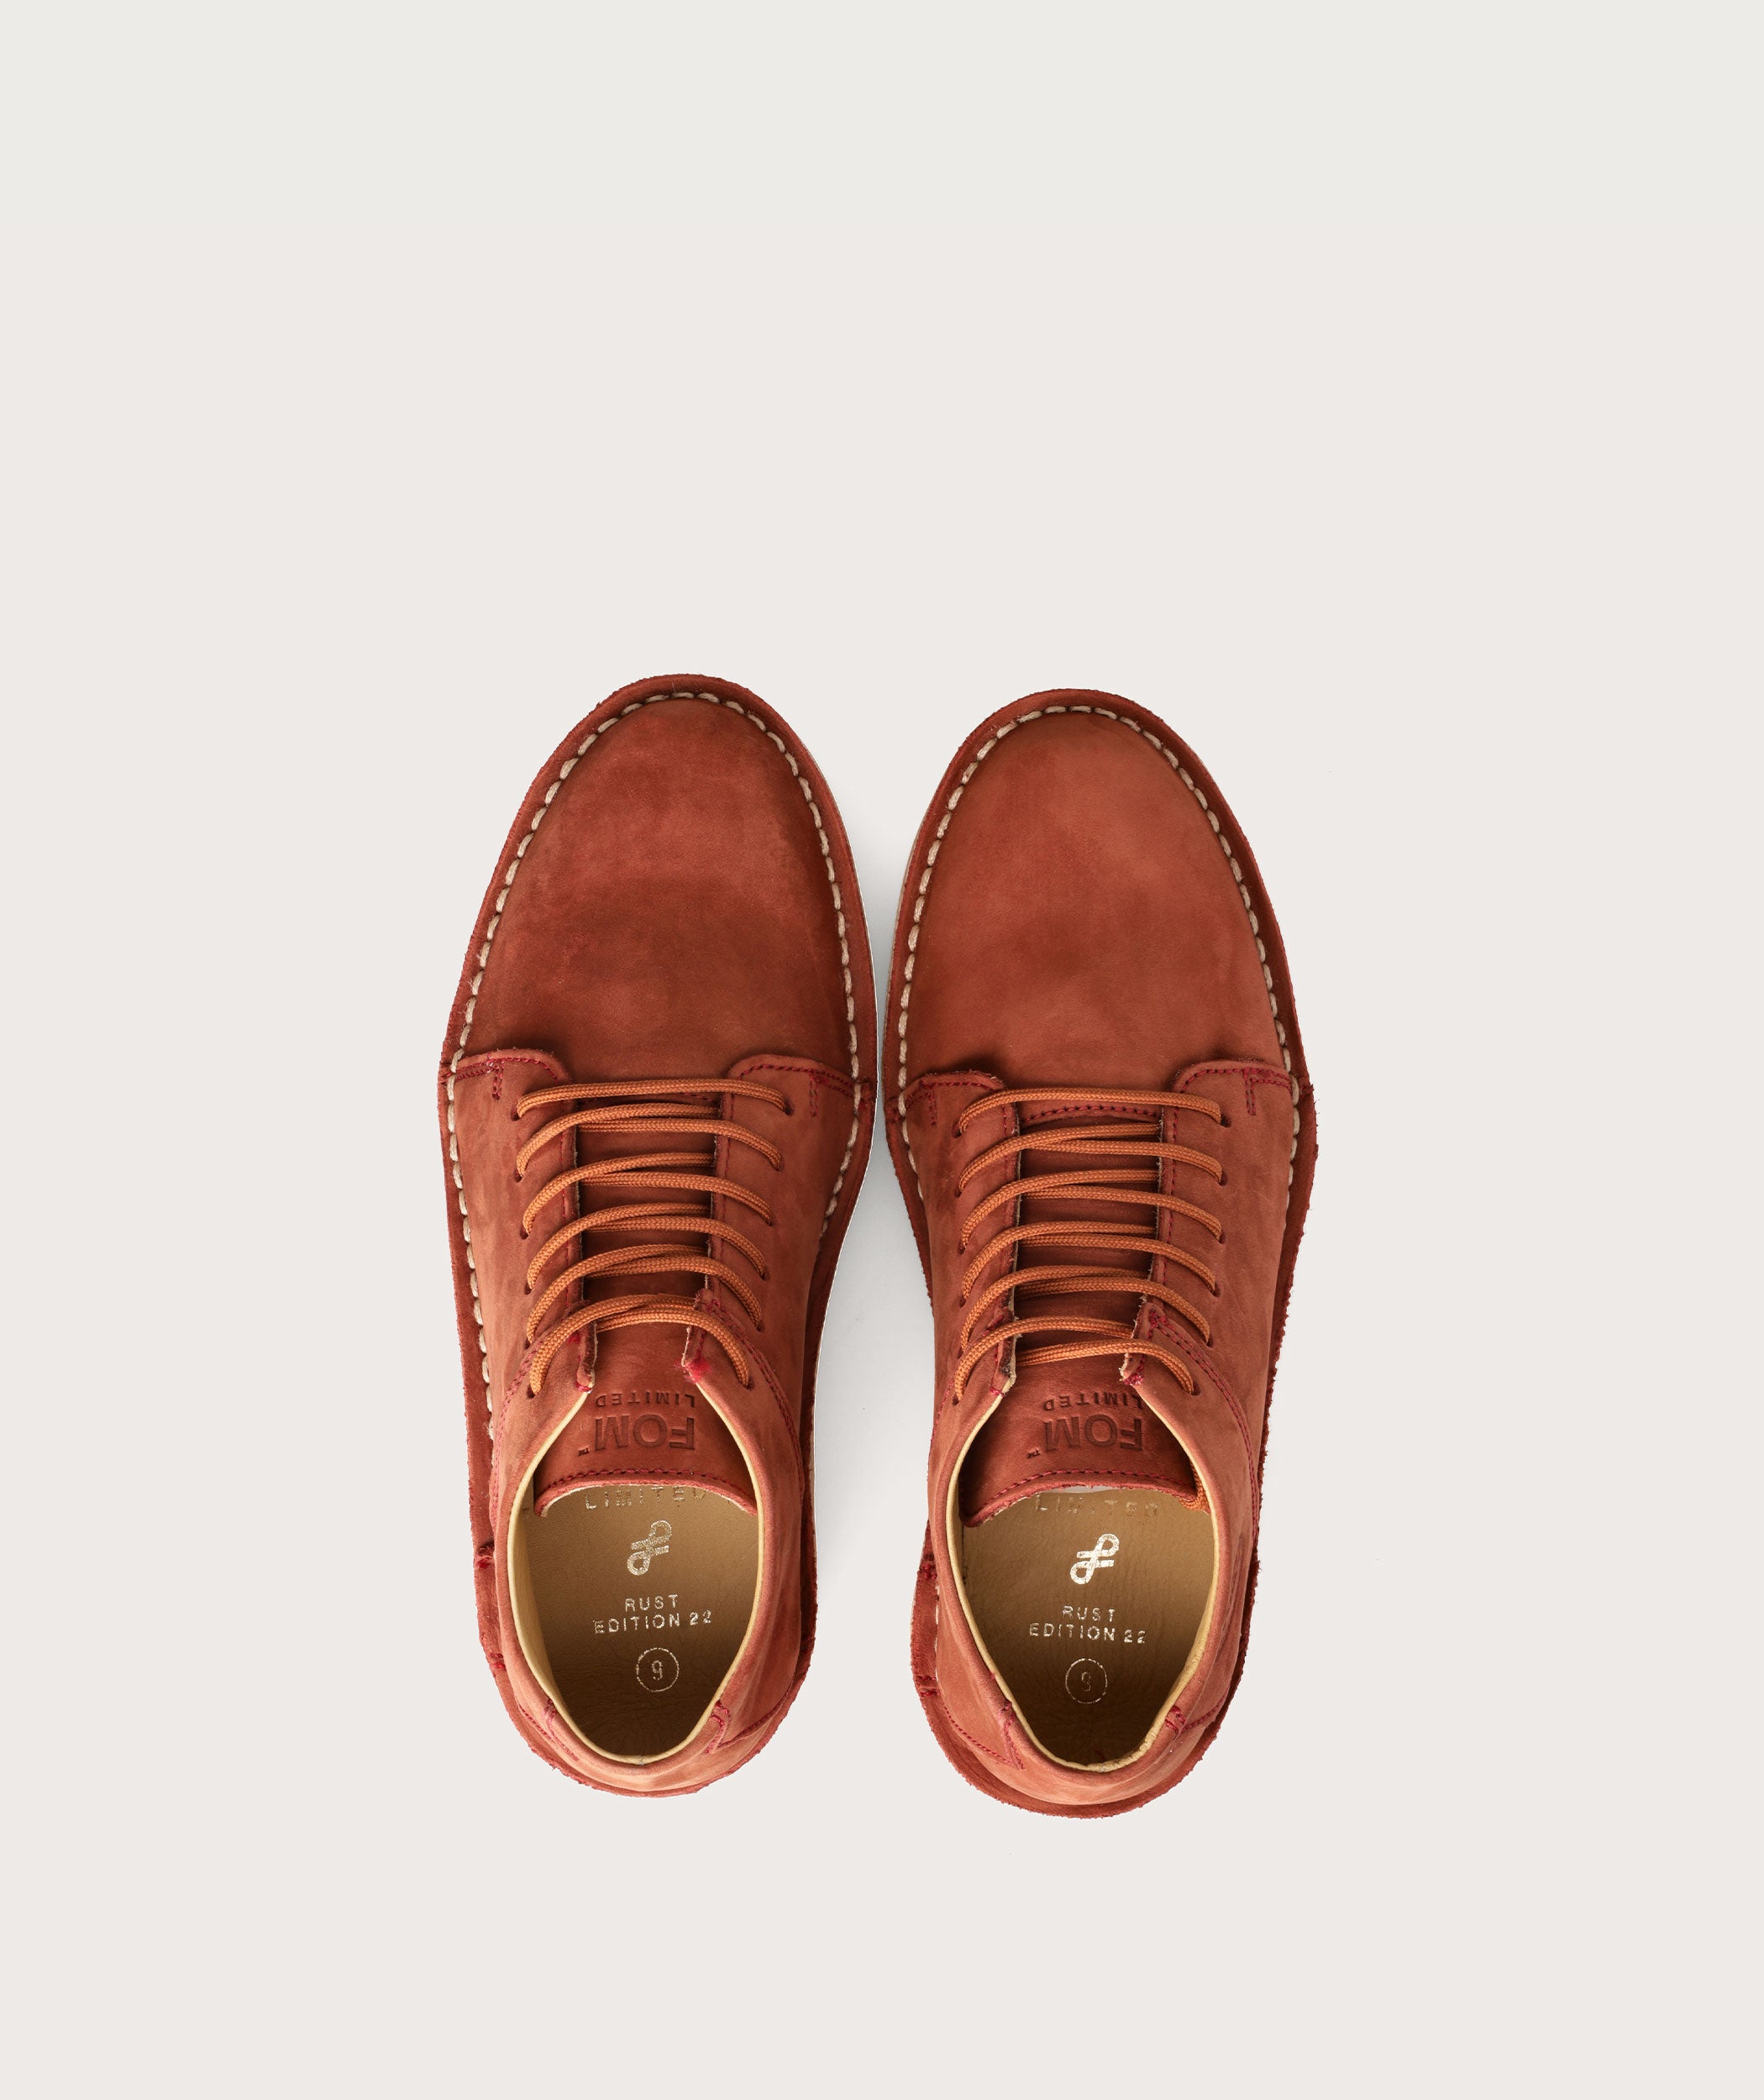 FOM Vellies Standard - Rust (Limited Edition)